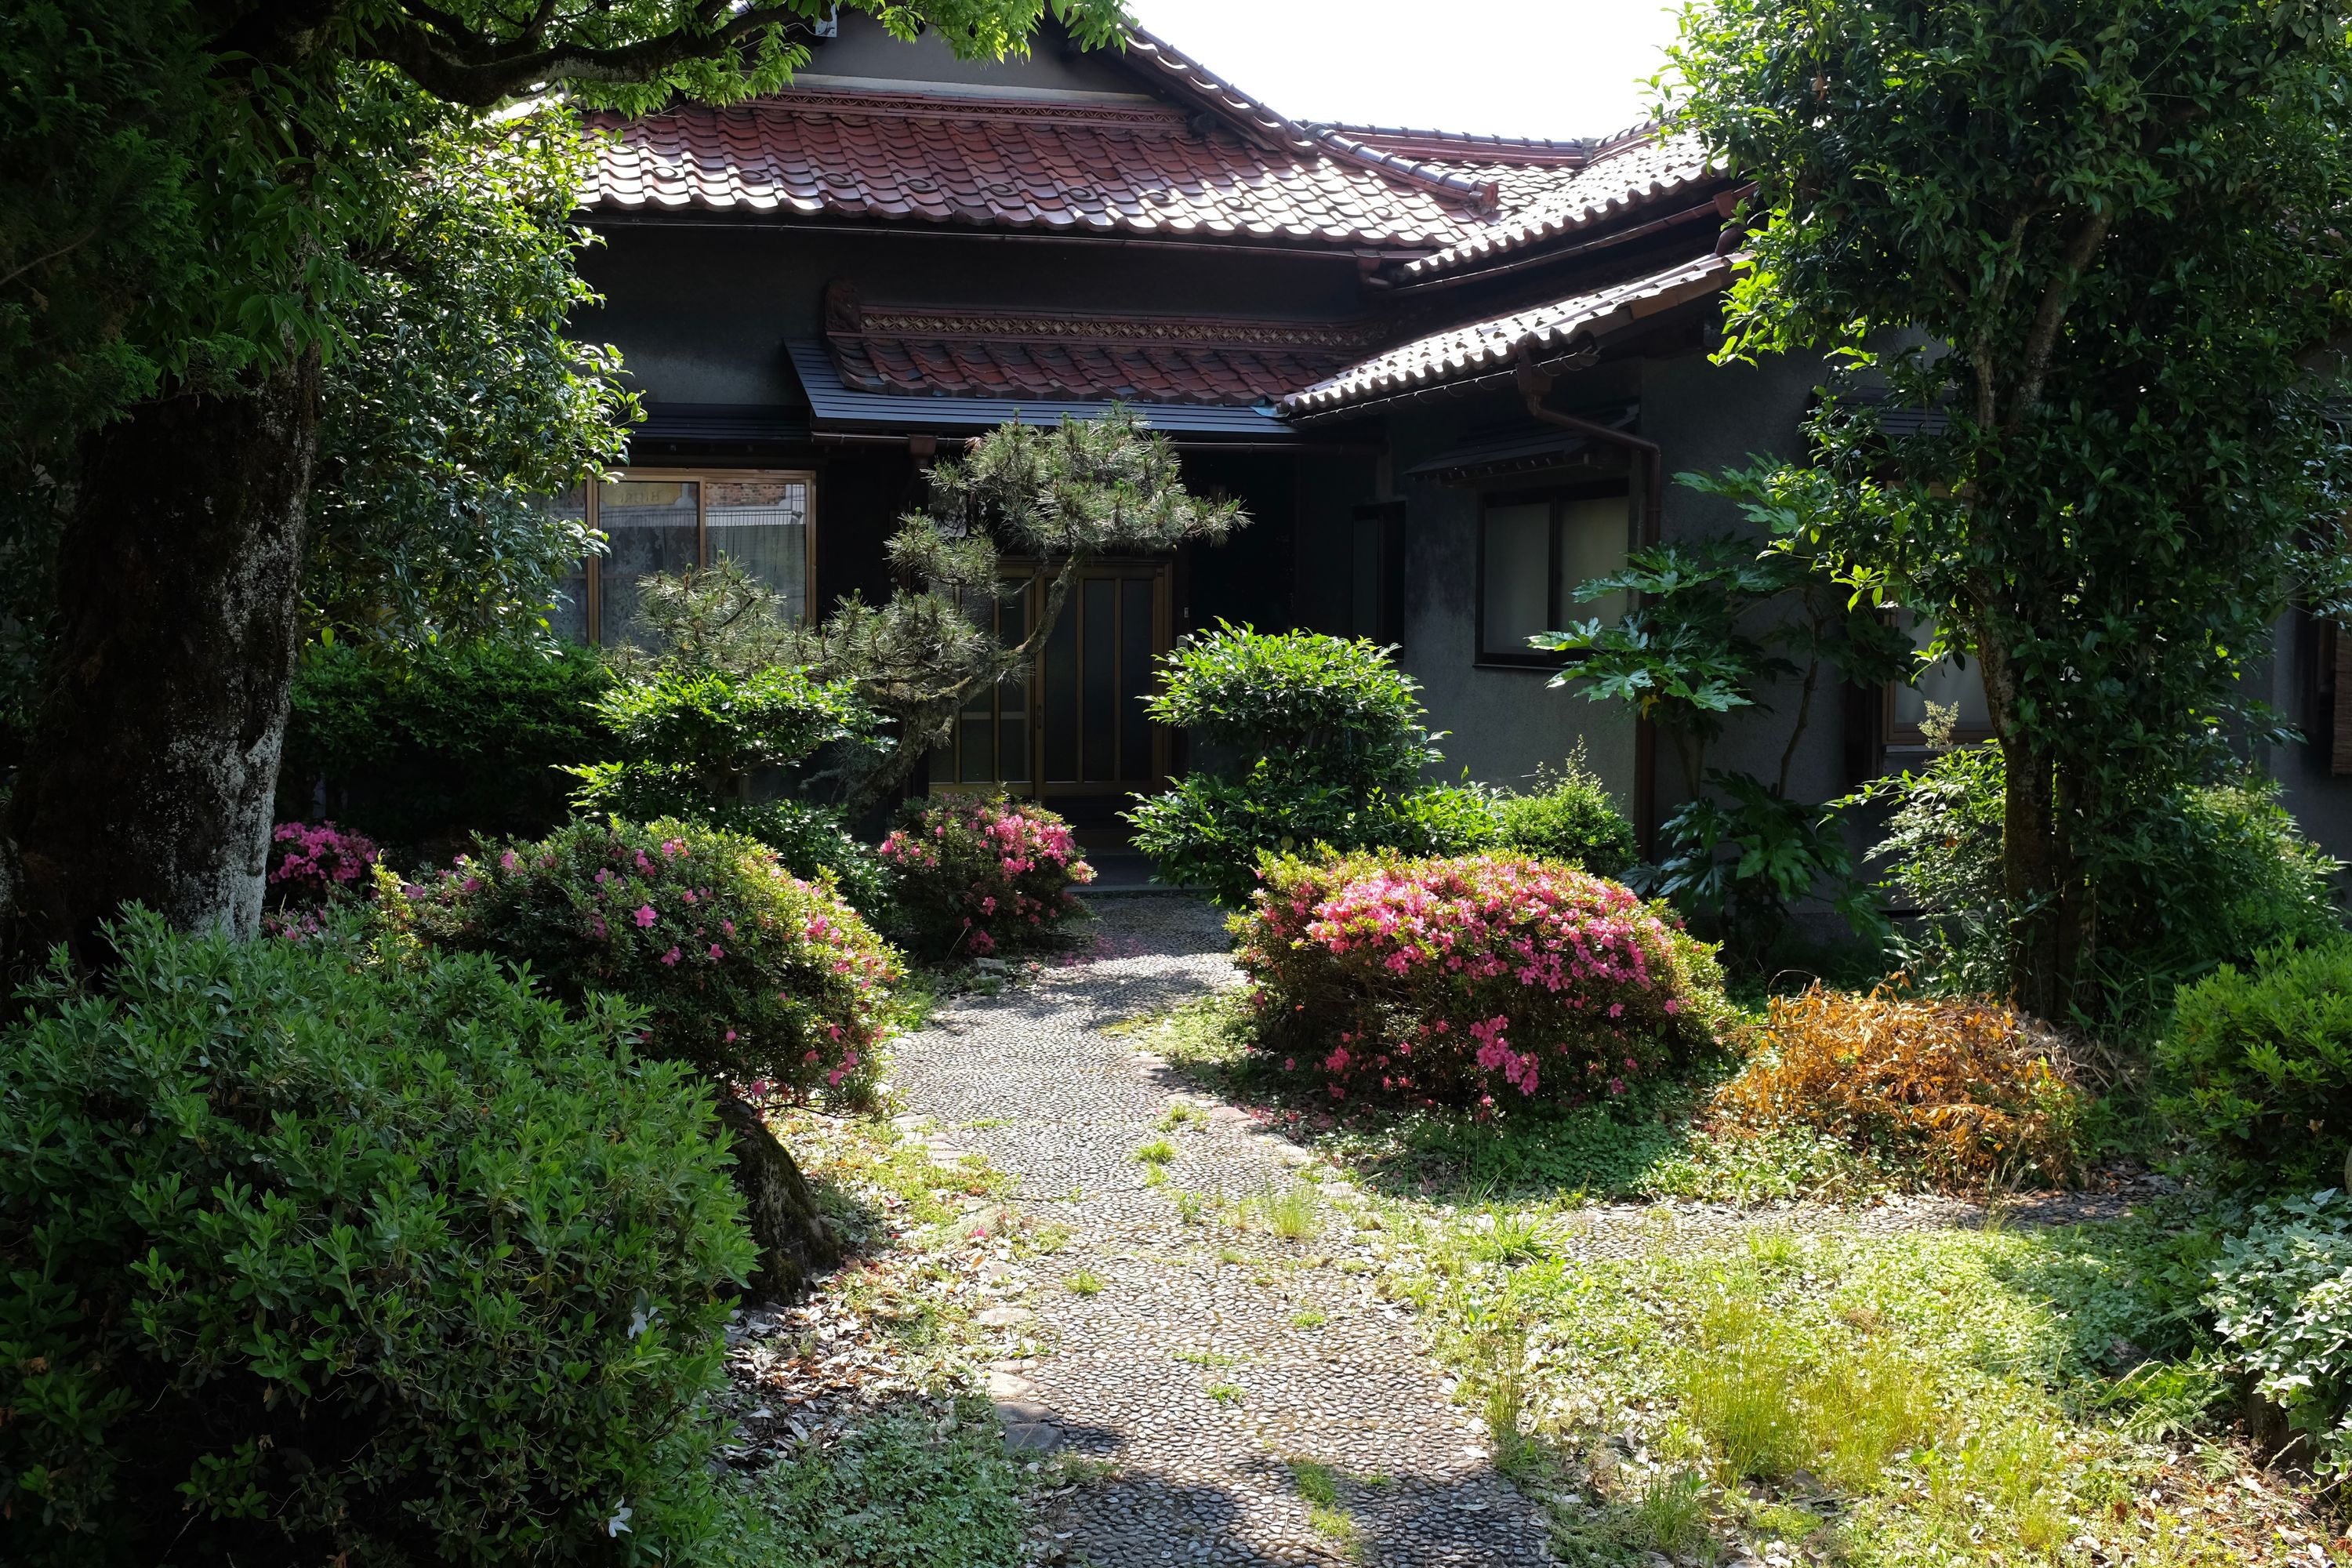 A traditional Japanese house with a garden of blooming azalea bushes.